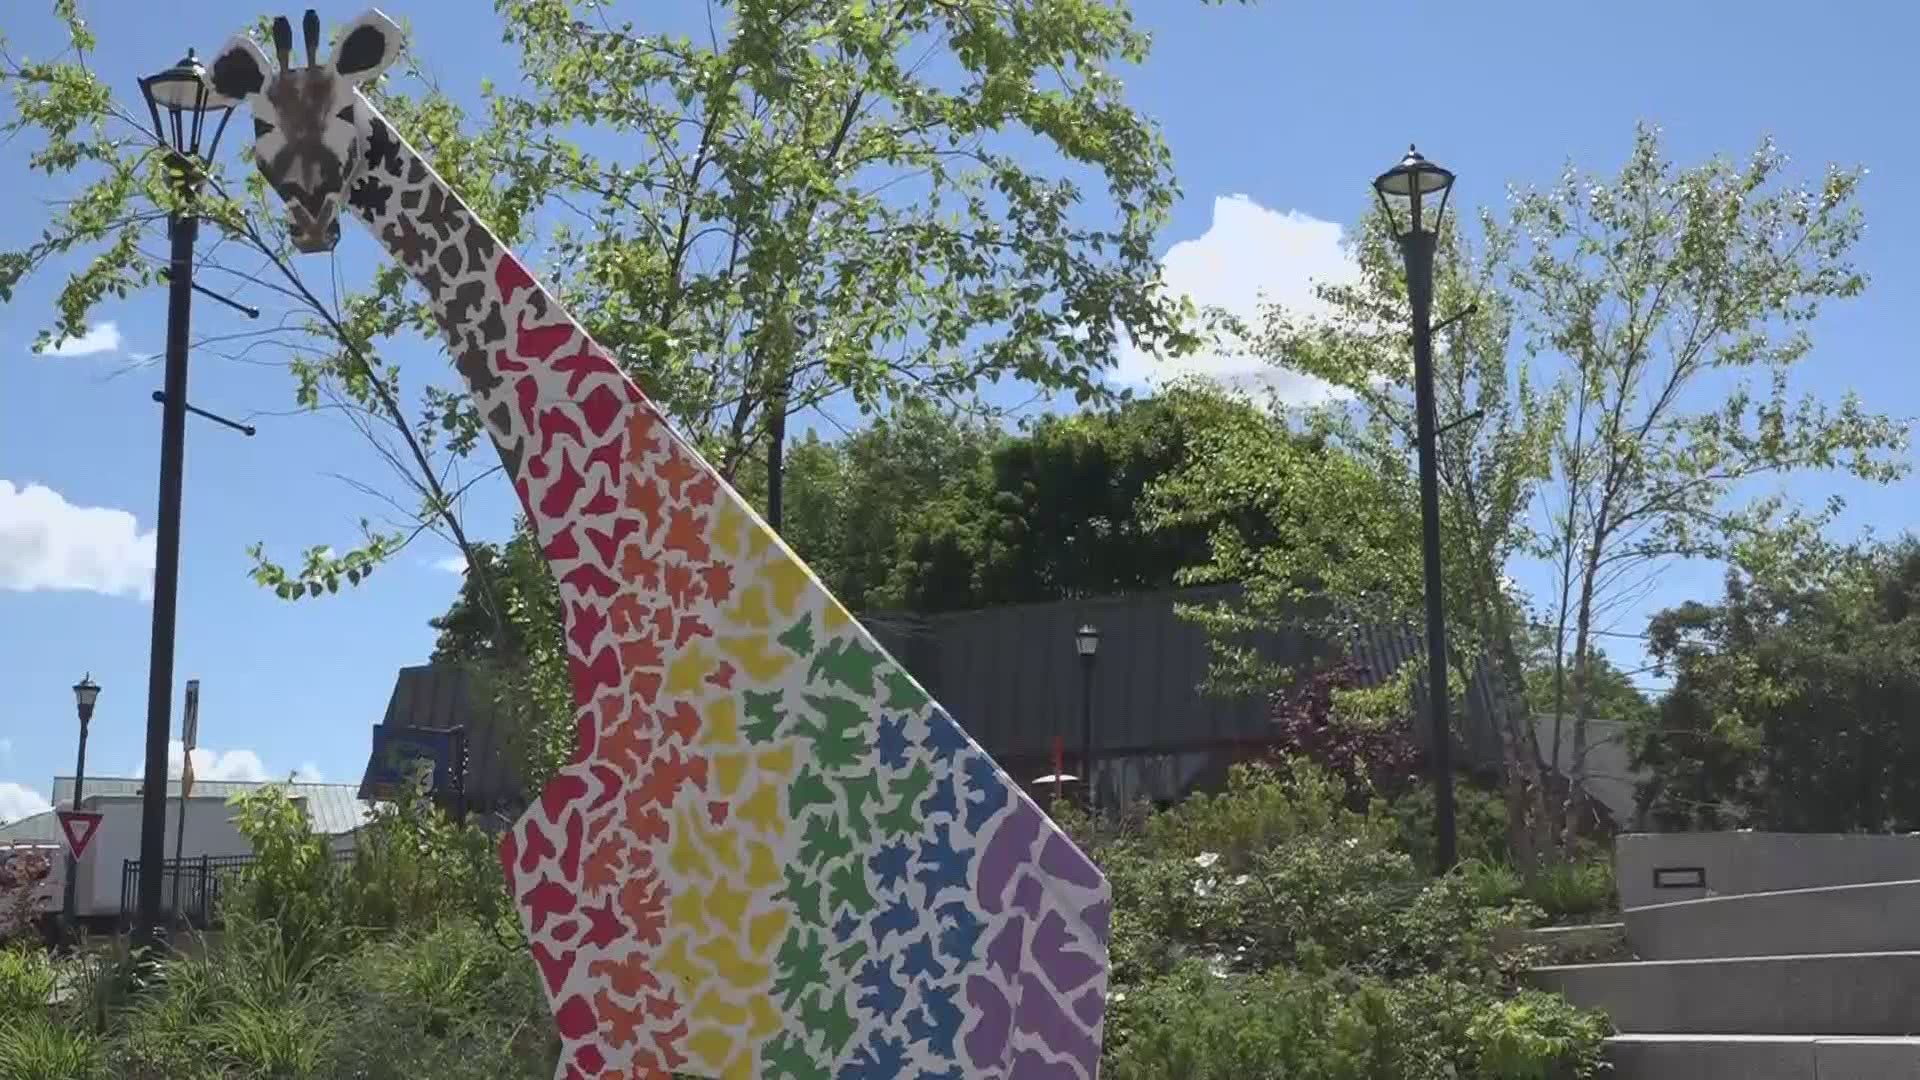 Colorful animal sculptures in Downtown Orono are honoring Pride Month and raising awareness.